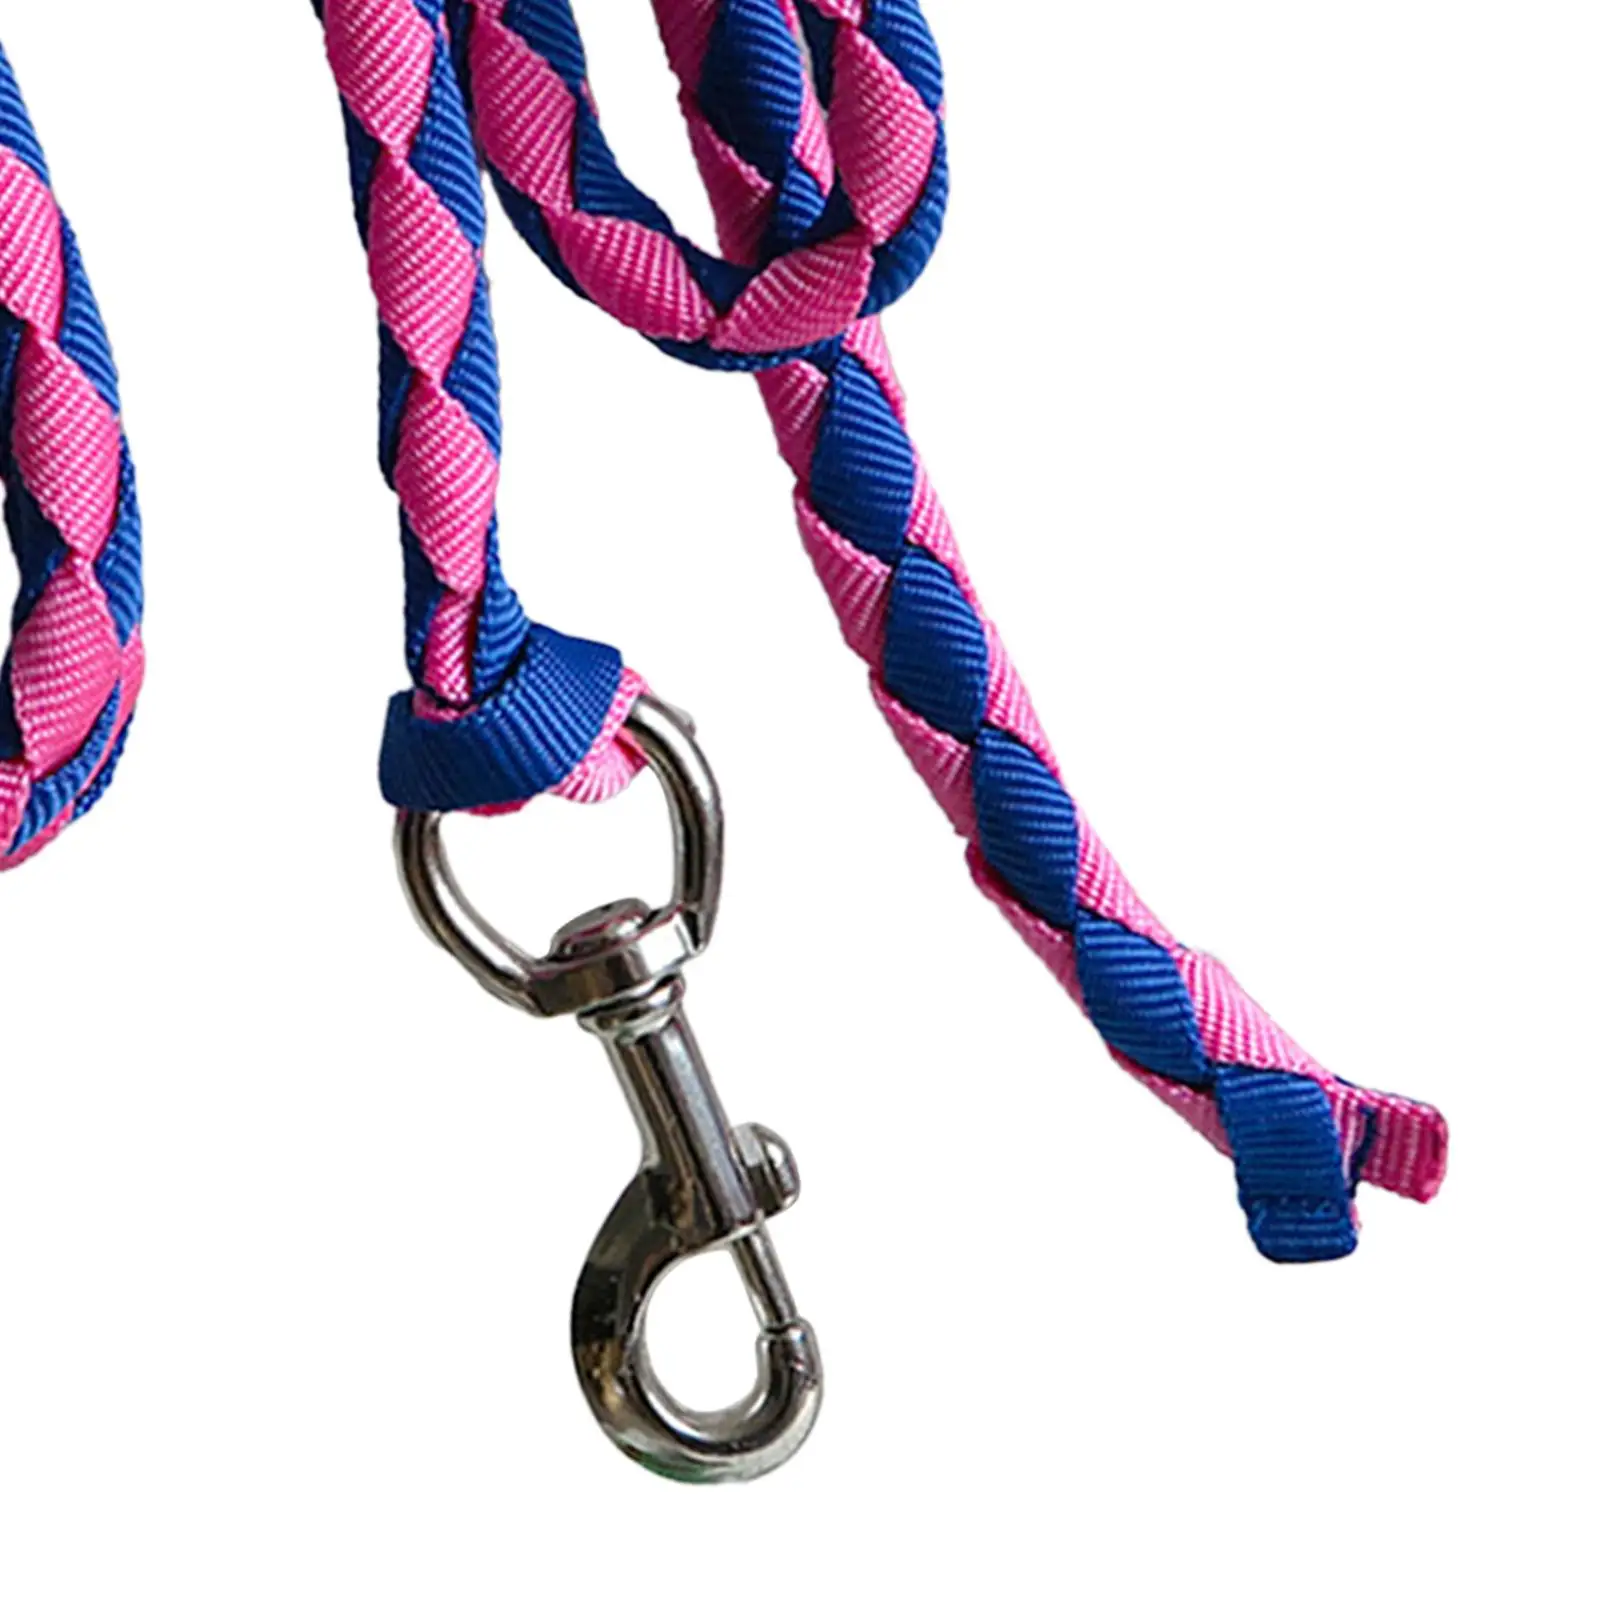 Horse Lead Rope with Bolt Snap Swivel Buckle Braided Horse Rope for Leading Training Horse, Pet, or Sheep